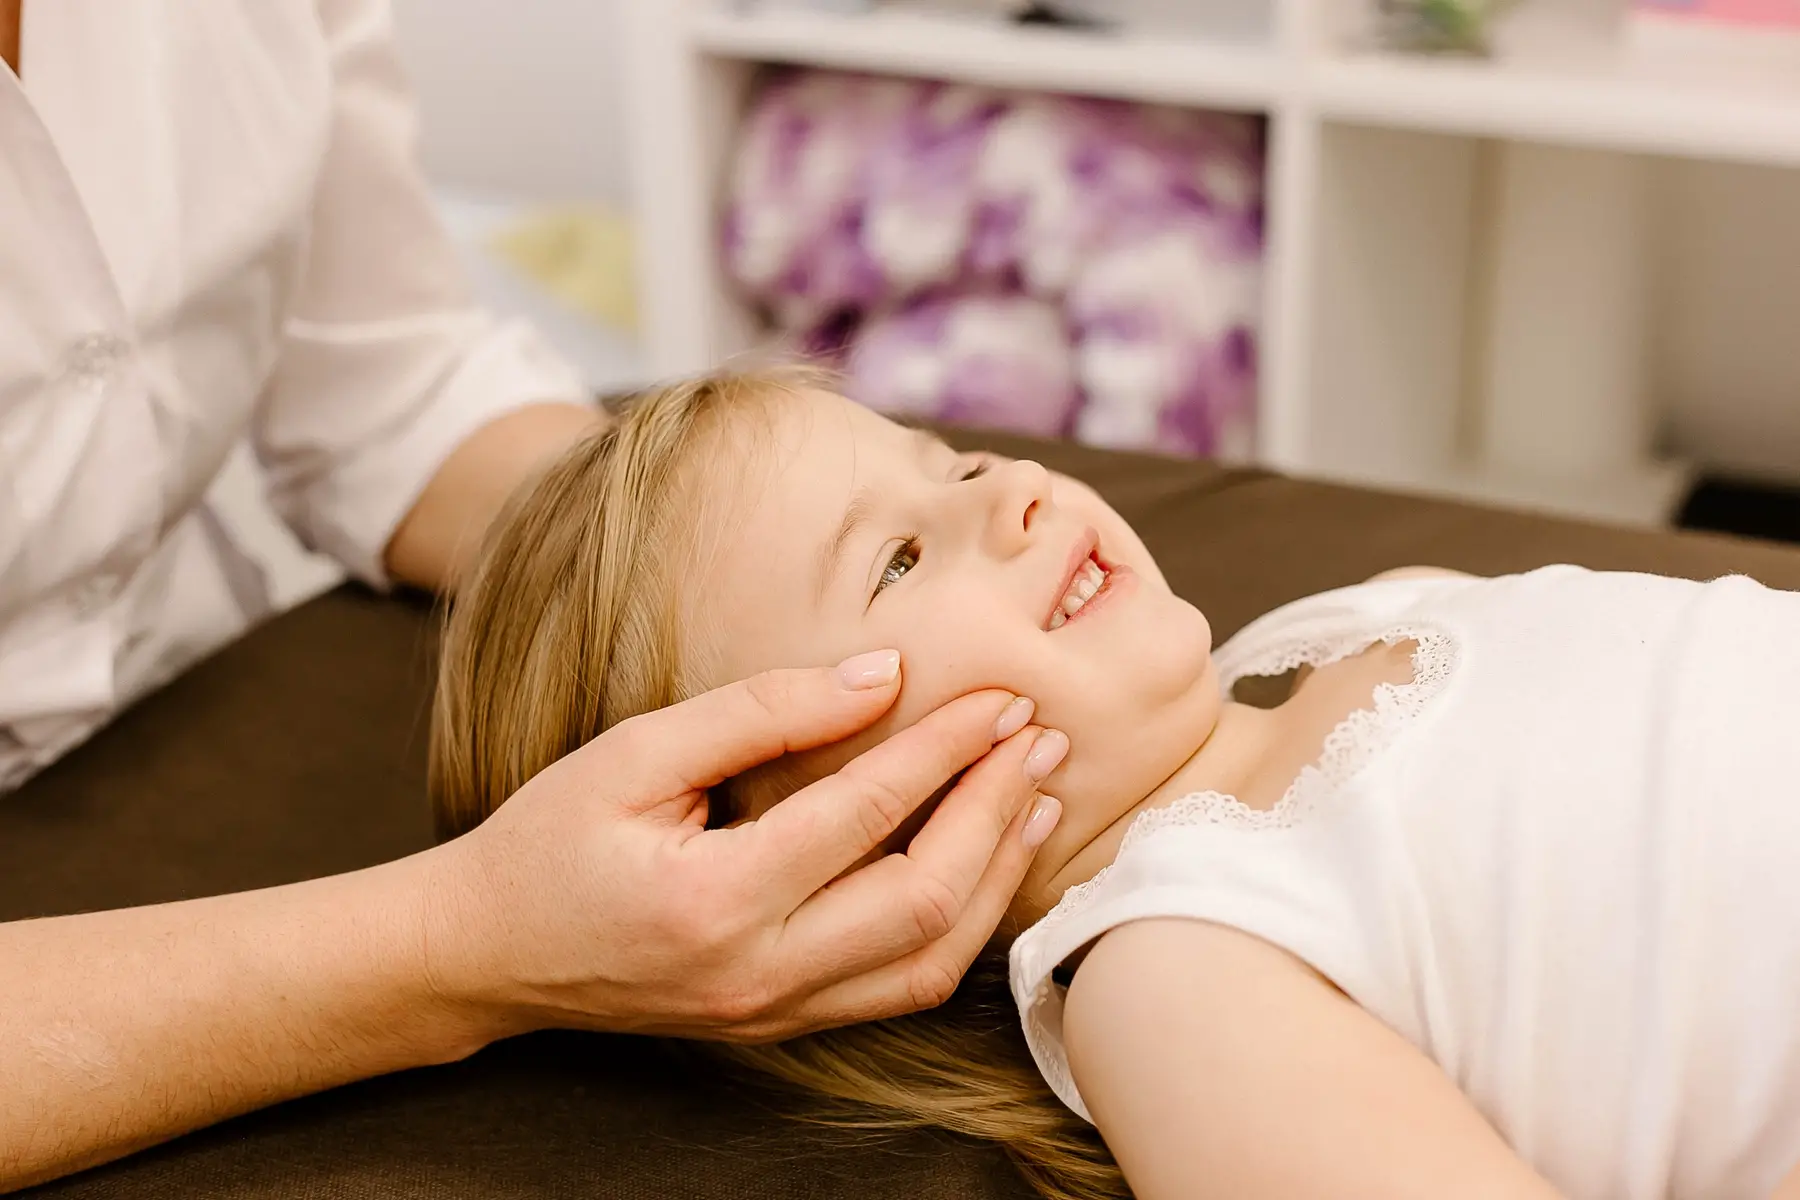 an osteopath doing physiological and emotional therapy with a child patient